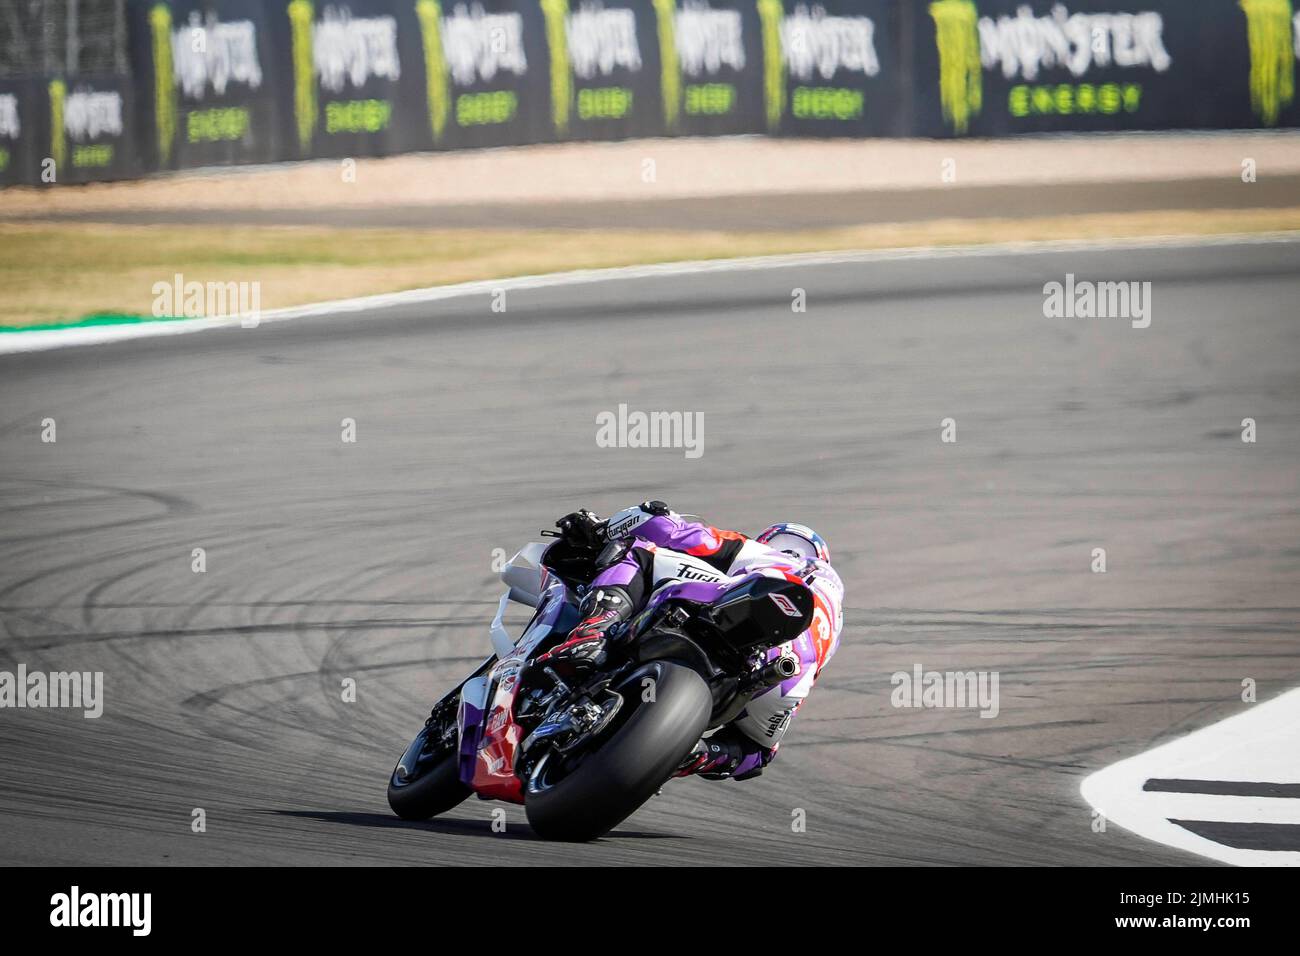 Silverstone, UK. 06th Aug, 2022. Qualifying for MotoGP Monster Energy British Grand Prix at Silverstone Circuit. August 06, 2022 In picture: France Johann Zarco Clasificacion del Gran Premio Monster Energy de MotoGP de Gran Bretaña en el Circuito de Silverstone, 06 de Agosto de 2022 POOL/ MotoGP.com/Cordon Press Images will be for editorial use only. Mandatory credit: © MotoGP.com Credit: CORDON PRESS/Alamy Live News Stock Photo